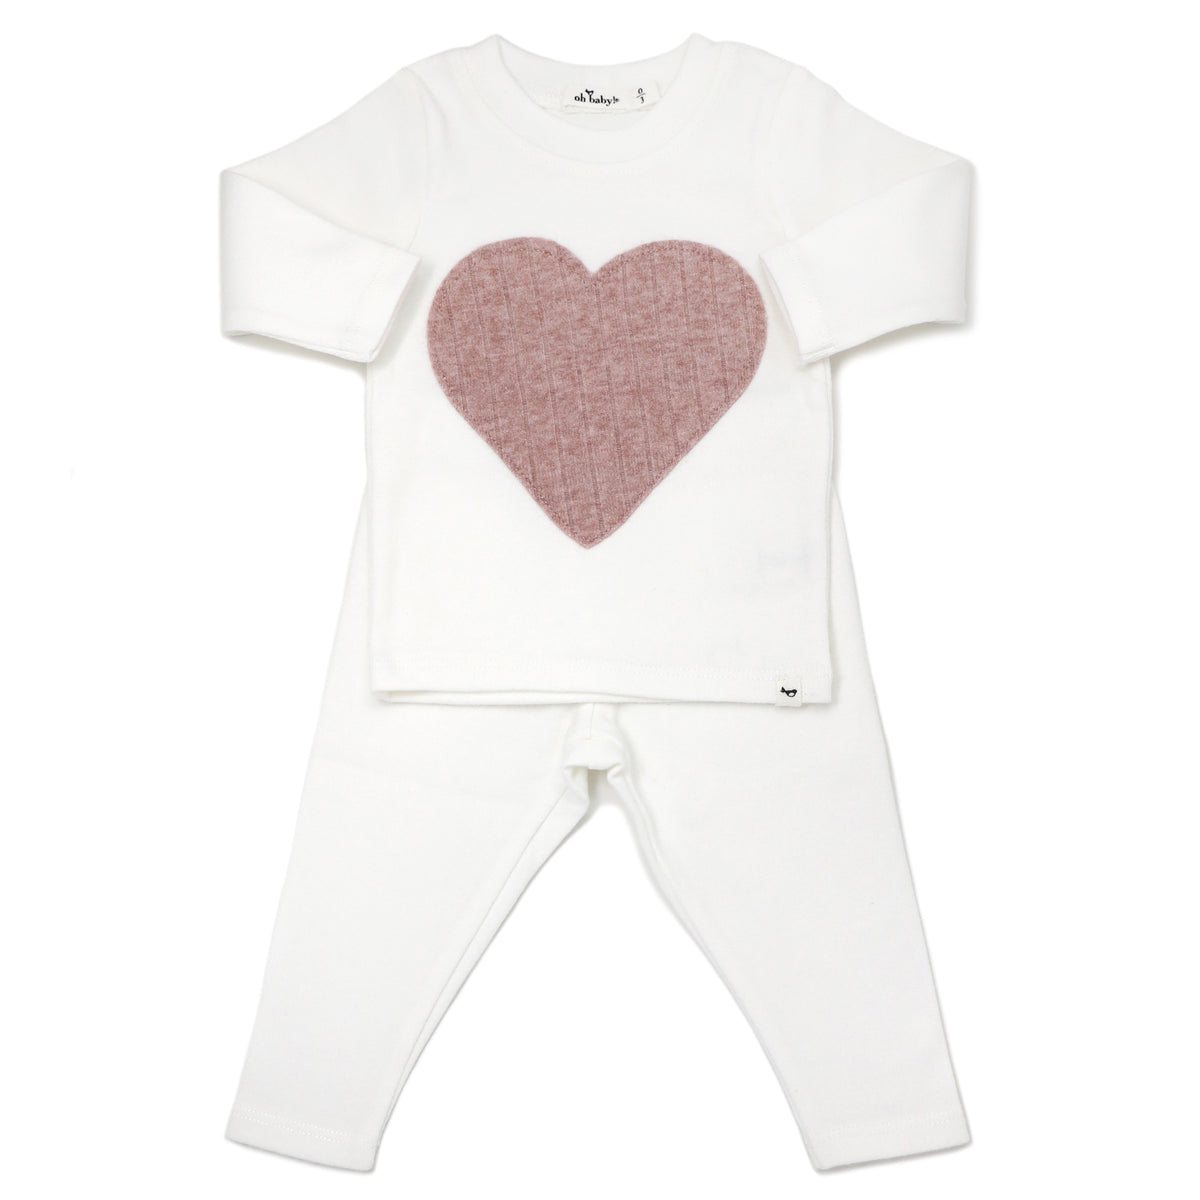 oh baby! Long Sleeve Two Piece Set - Ribbed Heart Blush - Cream